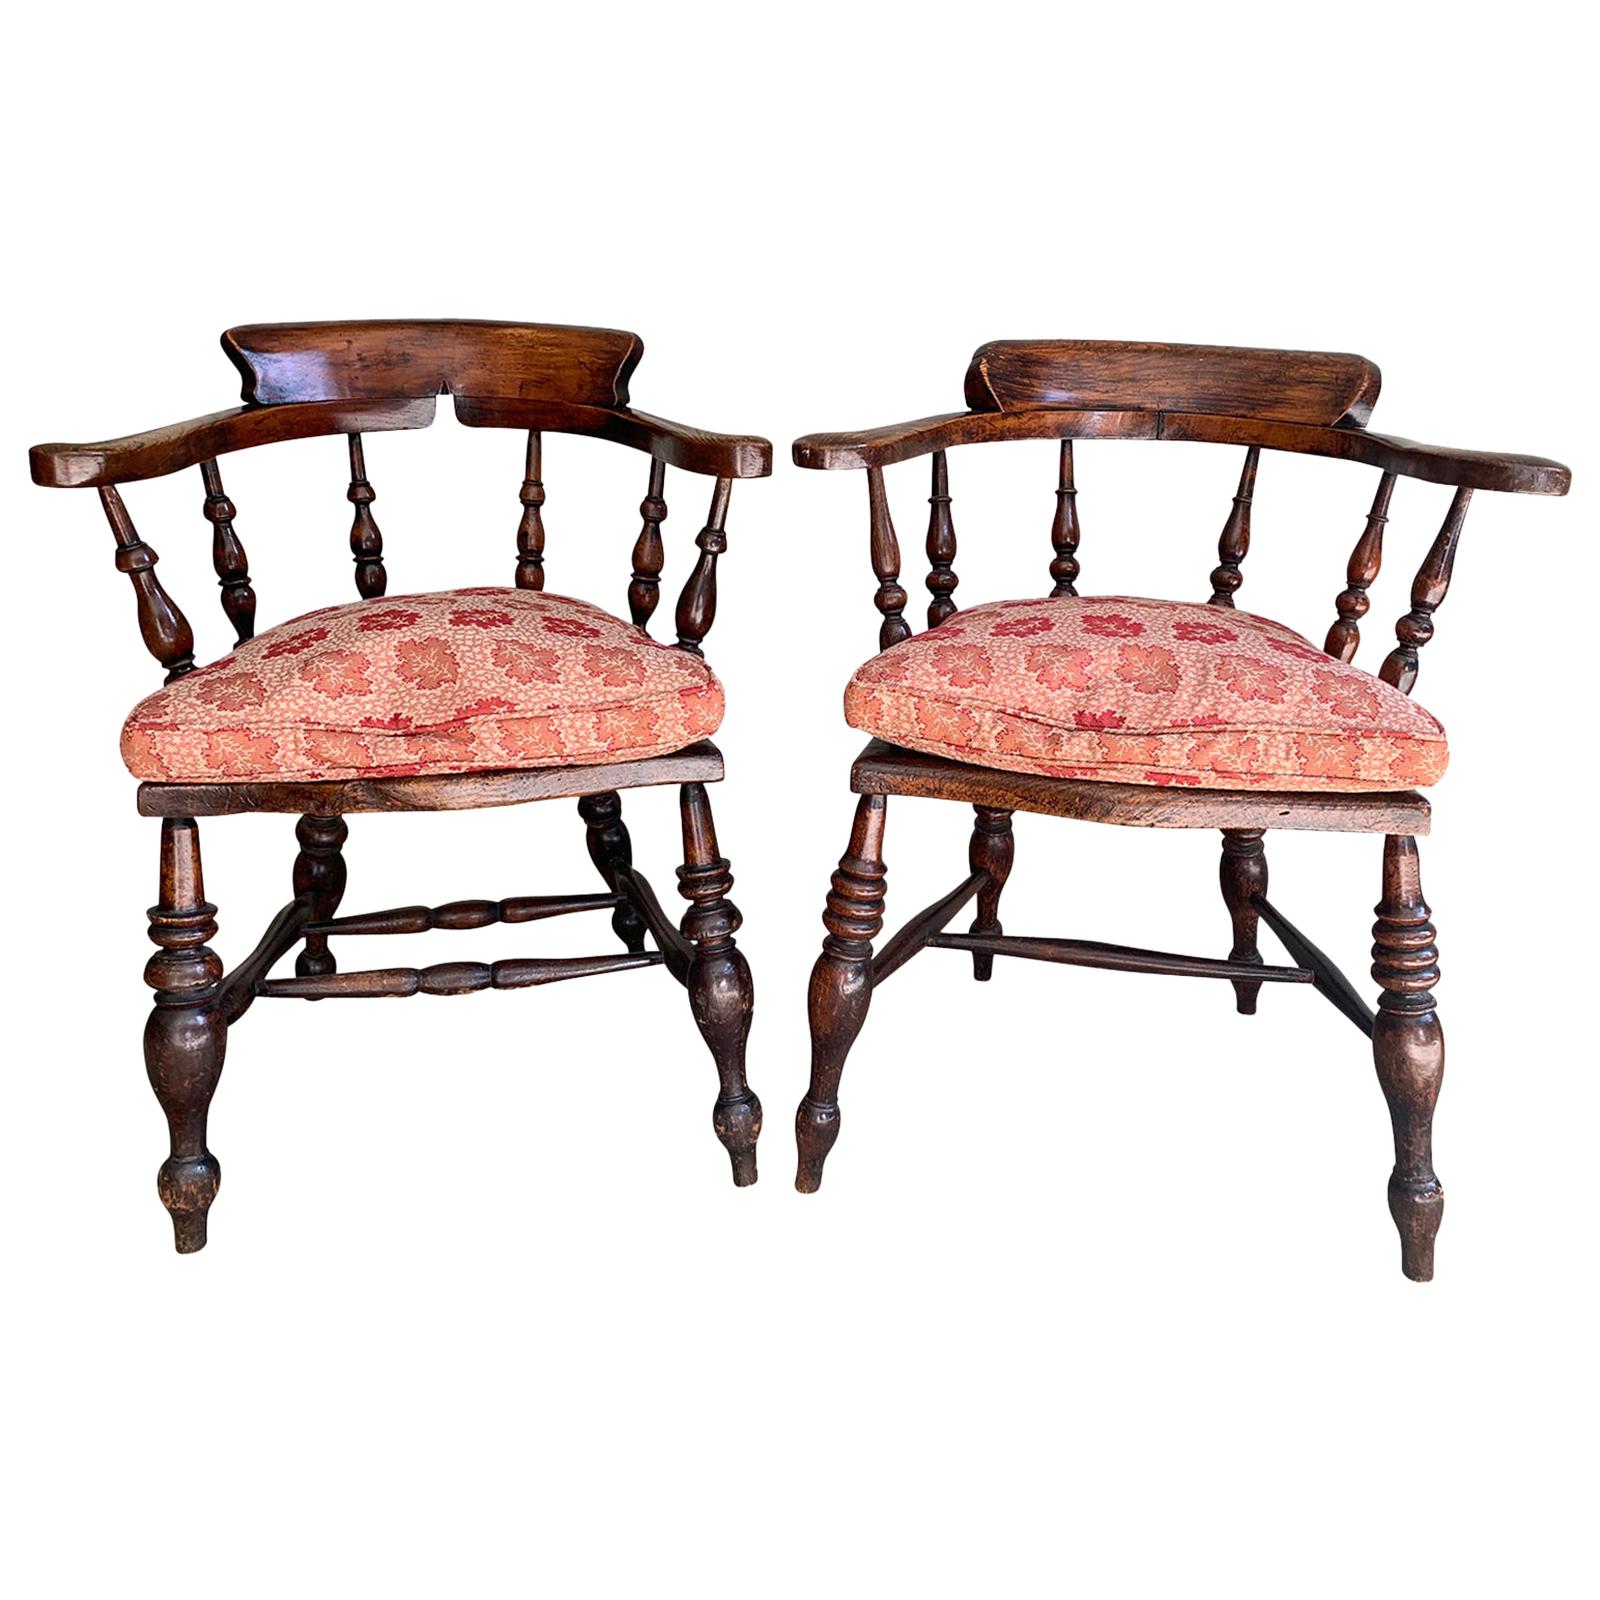 Pair of 19th Century English Armchairs with Pink Cushions For Sale